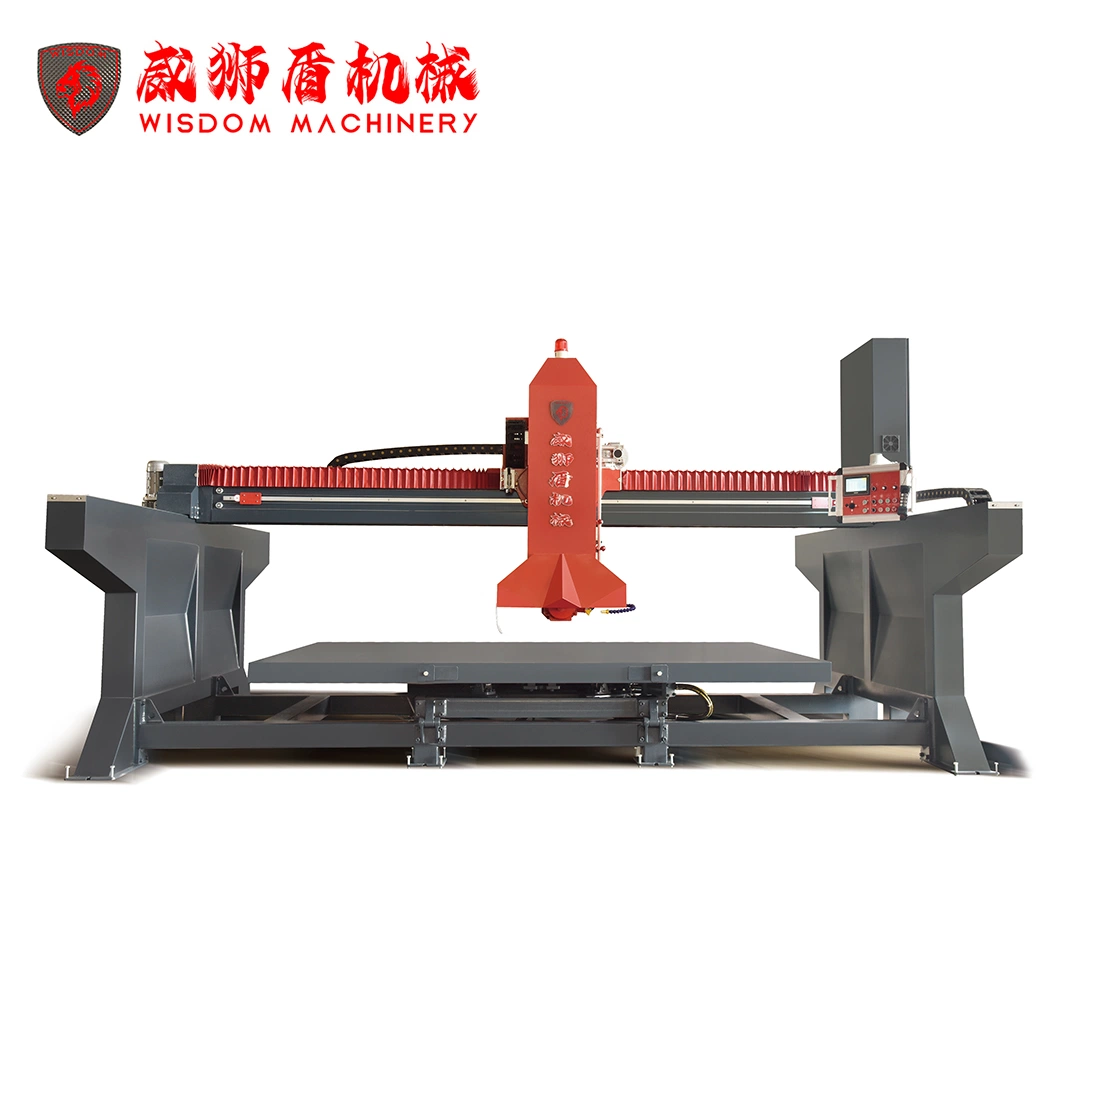 Factory Price Auto PLC Stone Cutting Machine Bridge Type Infrared Laser Marble Table Saw Chamfering Miter Cutter Machinery Wsd625m